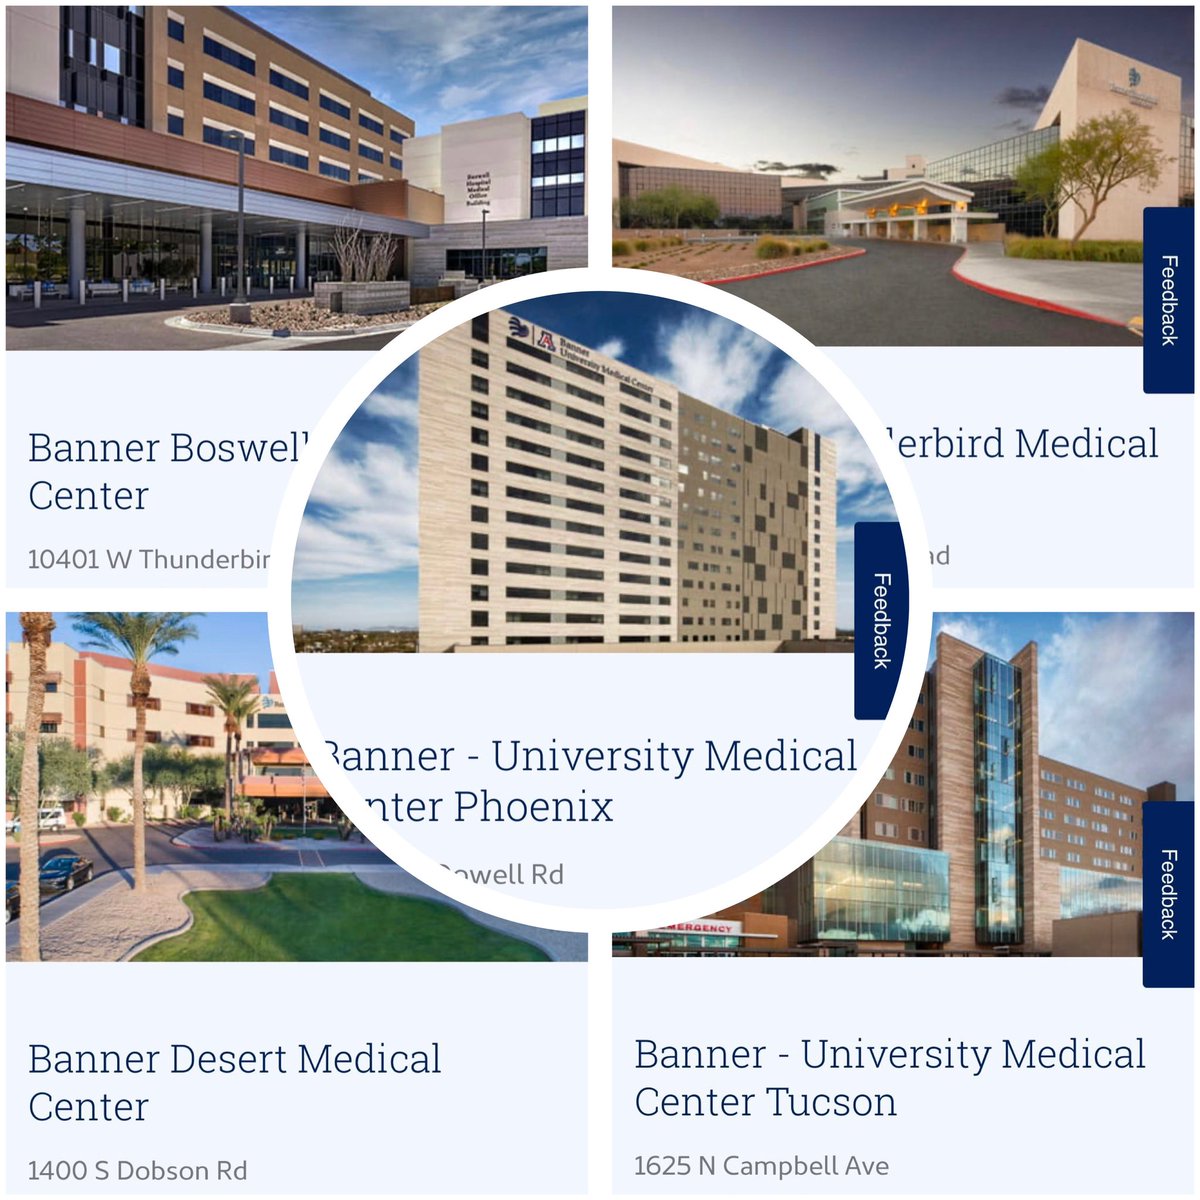 Five of the ten largest hospitals in Arizona are part of the #BannerHealth network, including our 2 @uarizona affiliated academic medical centers.